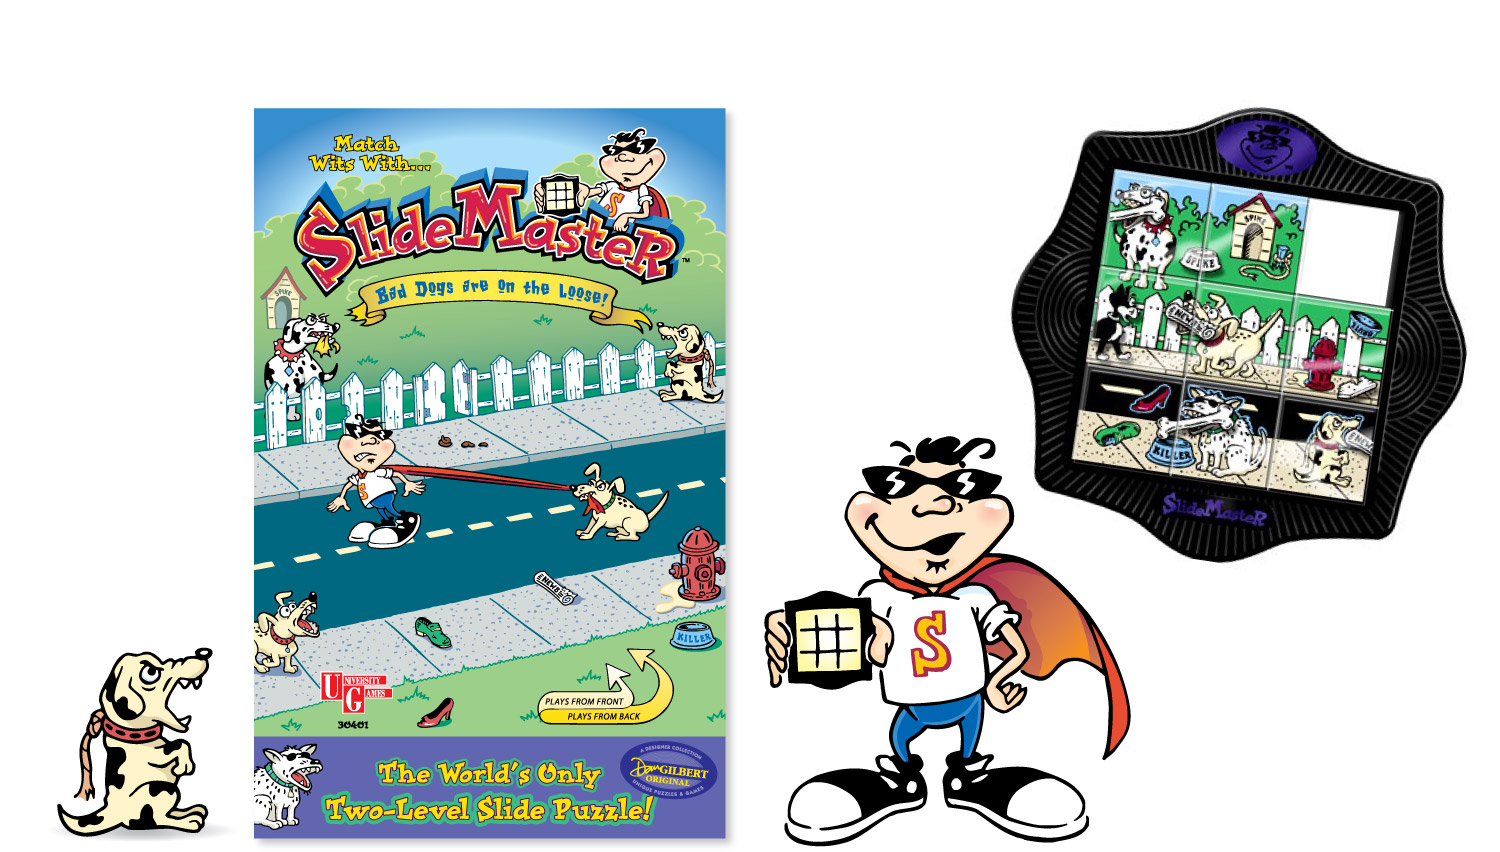 "SlideMaster" original character and art for slide puzzle and clamshell package